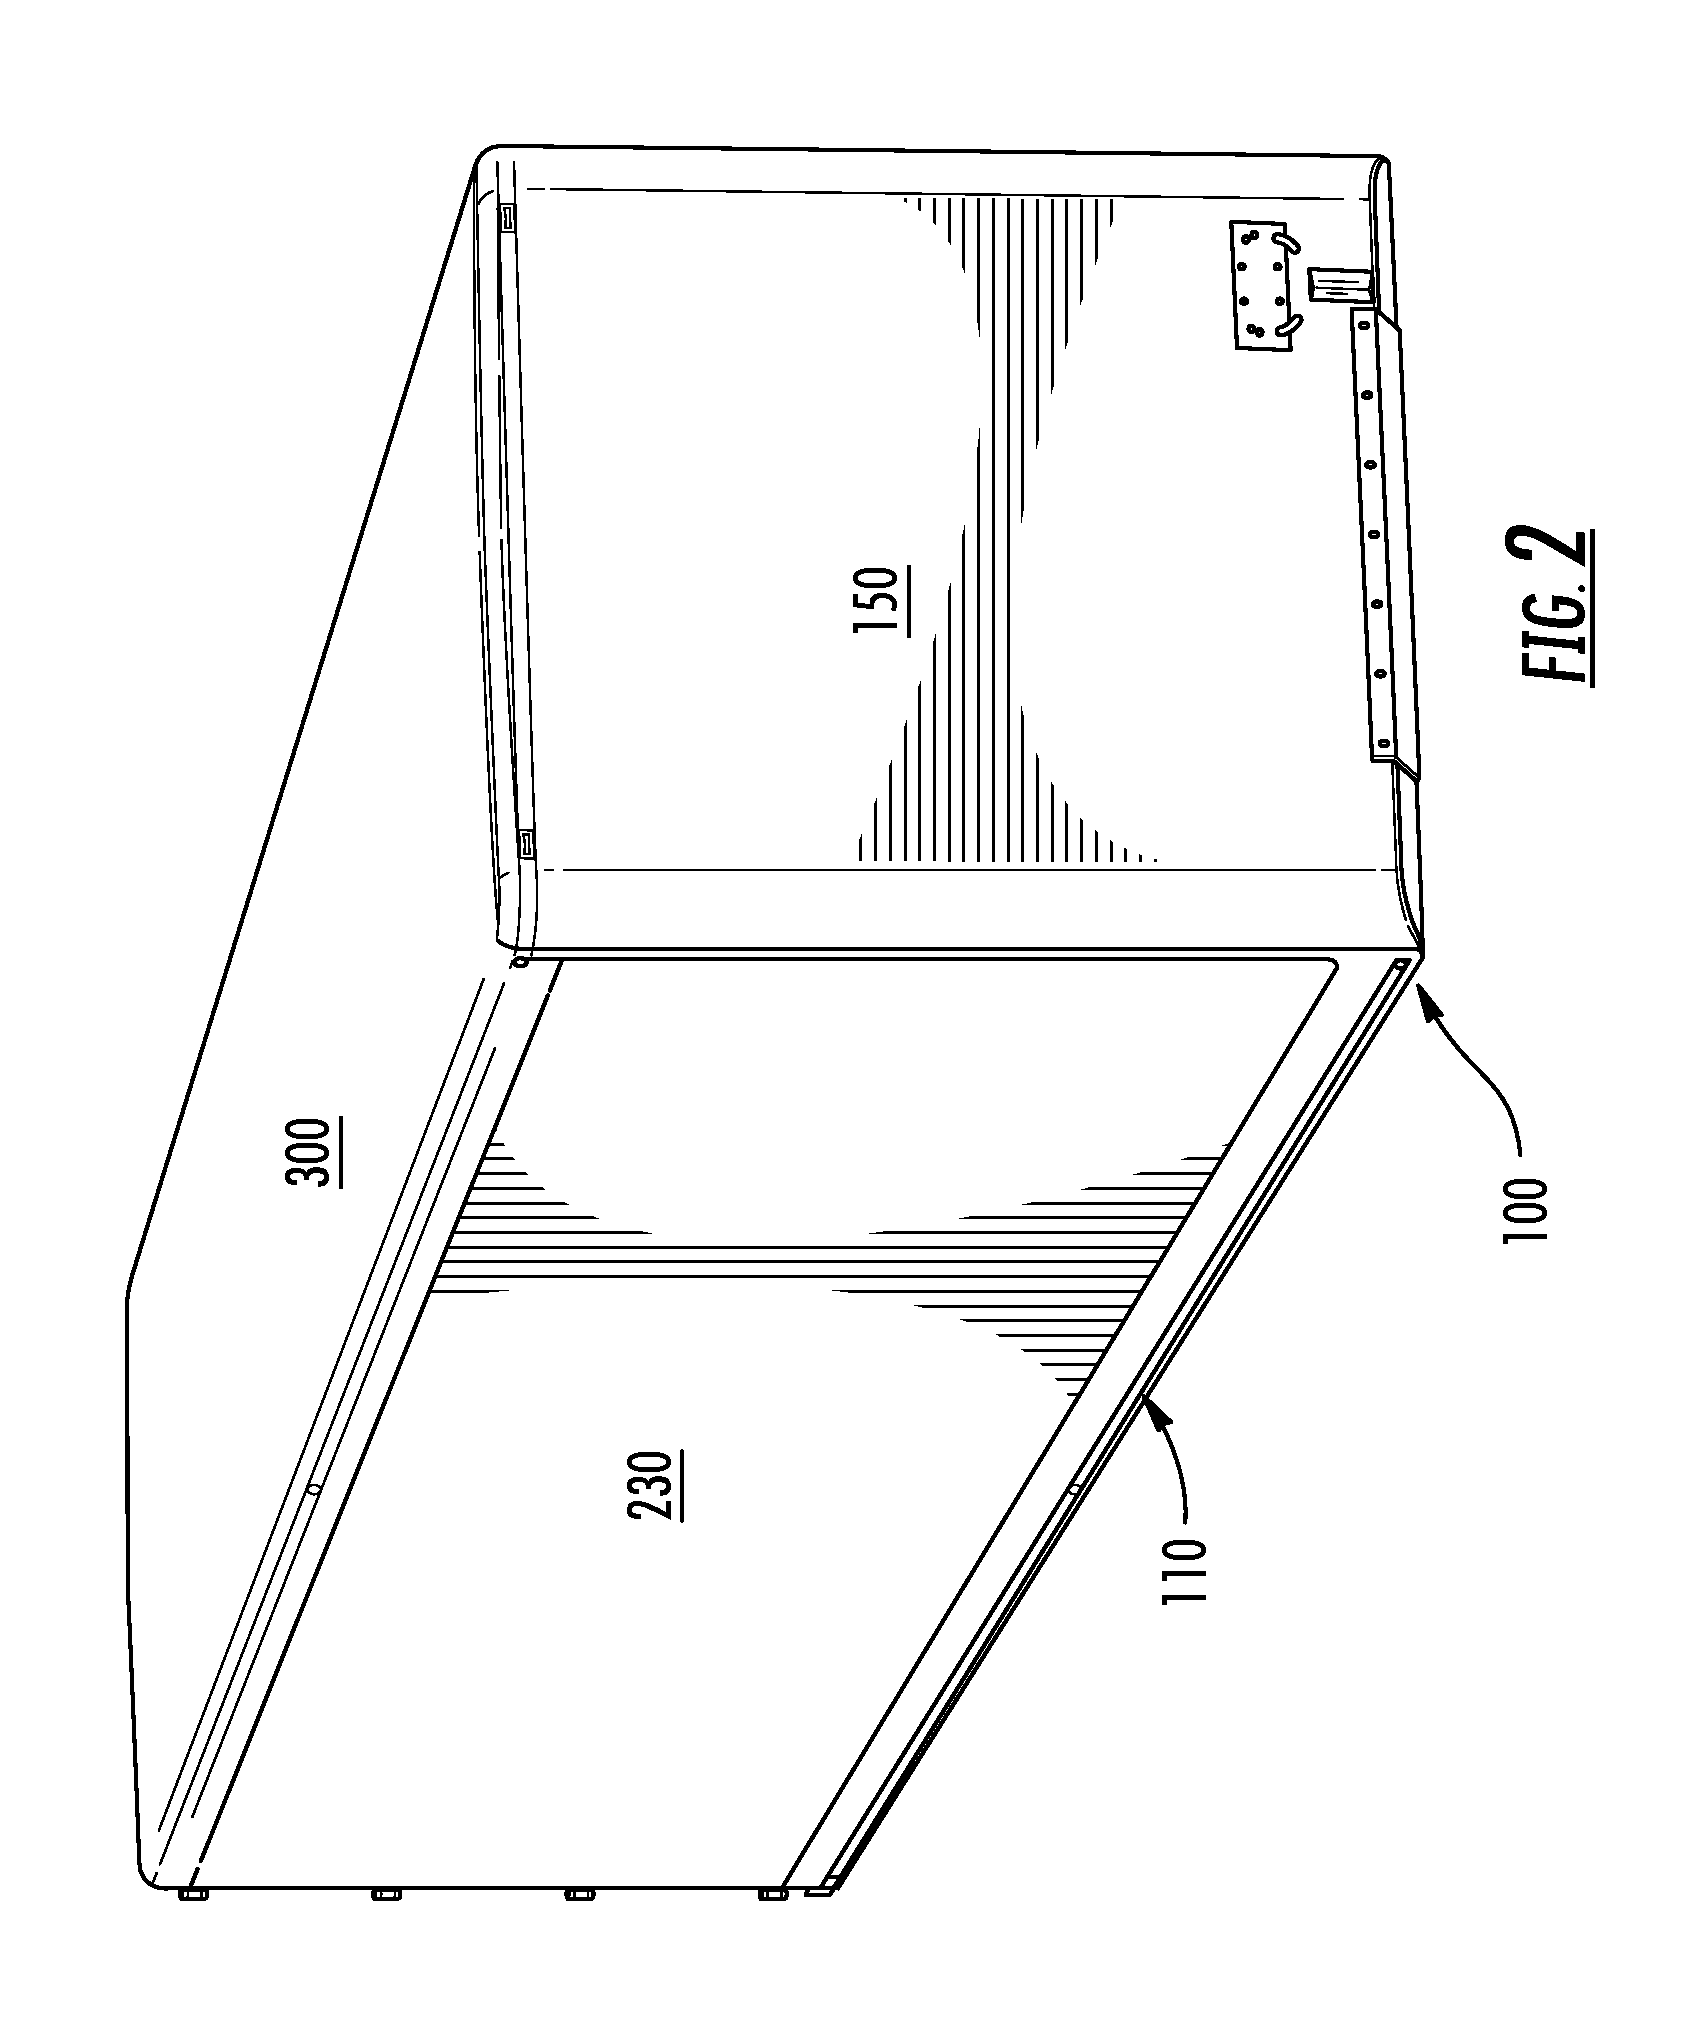 Modular composite structural component and structures formed therewith